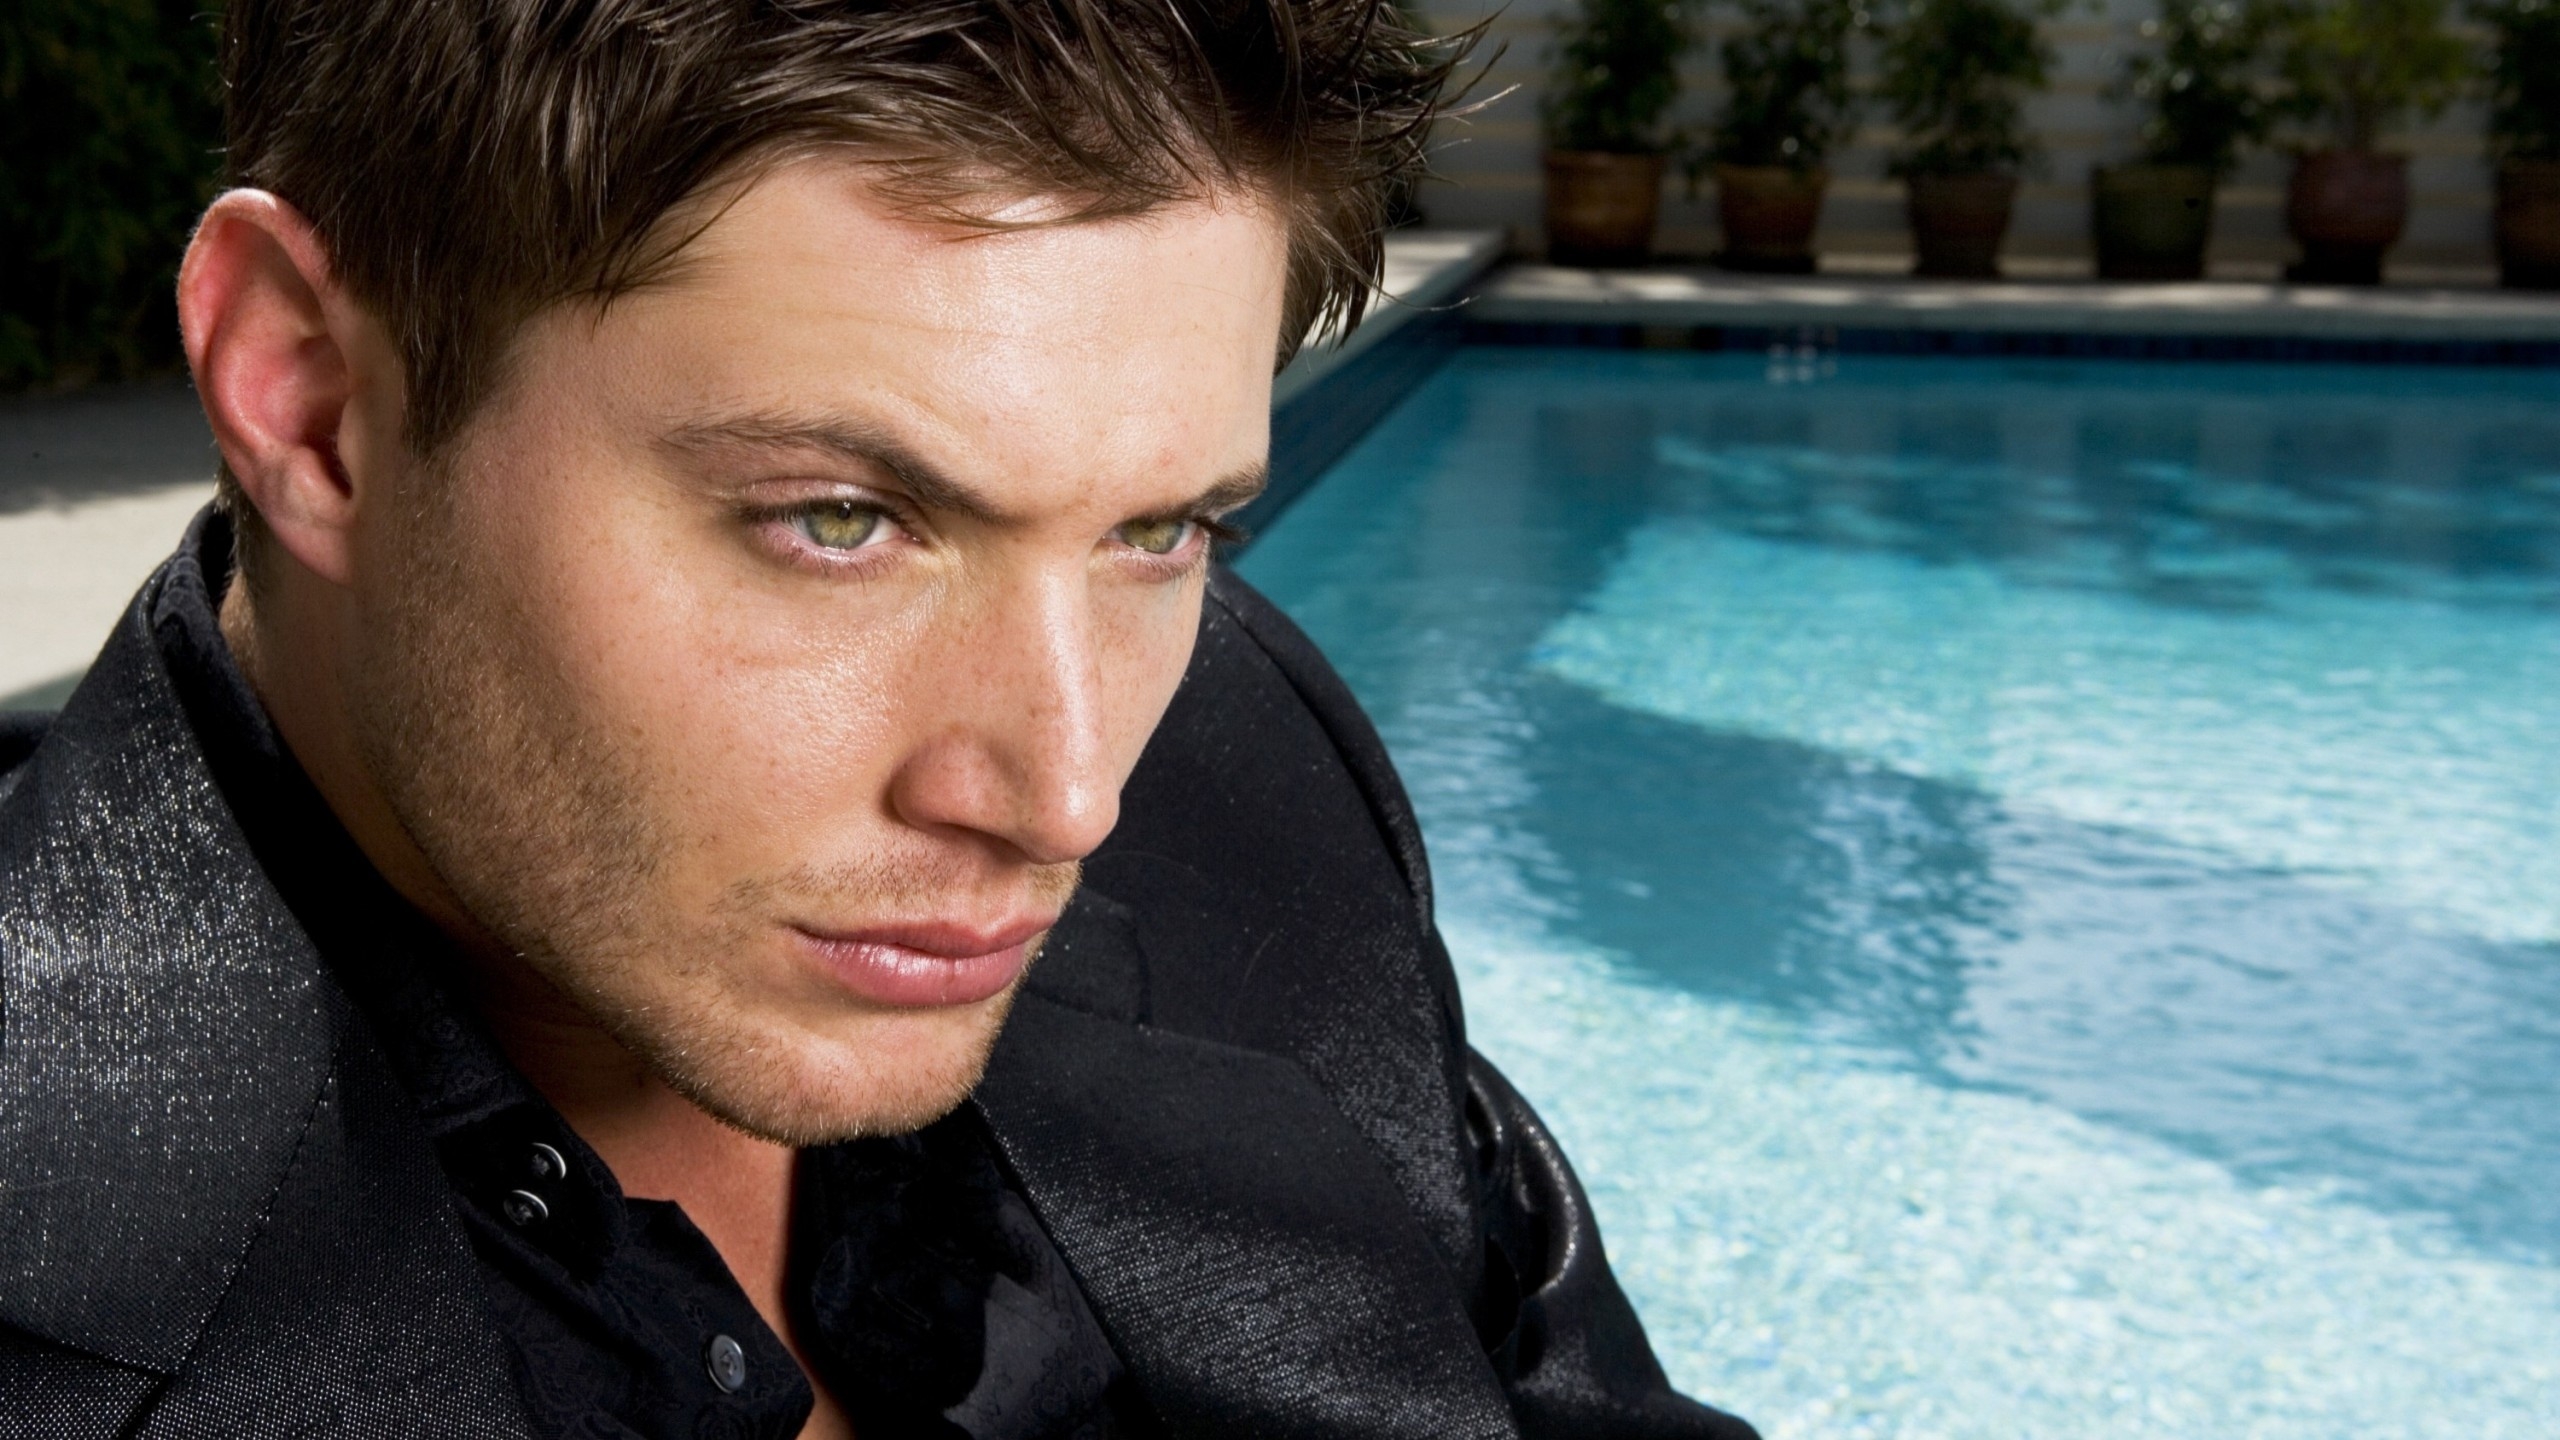 Jensen Ackles Profile Look for 2560x1440 HDTV resolution